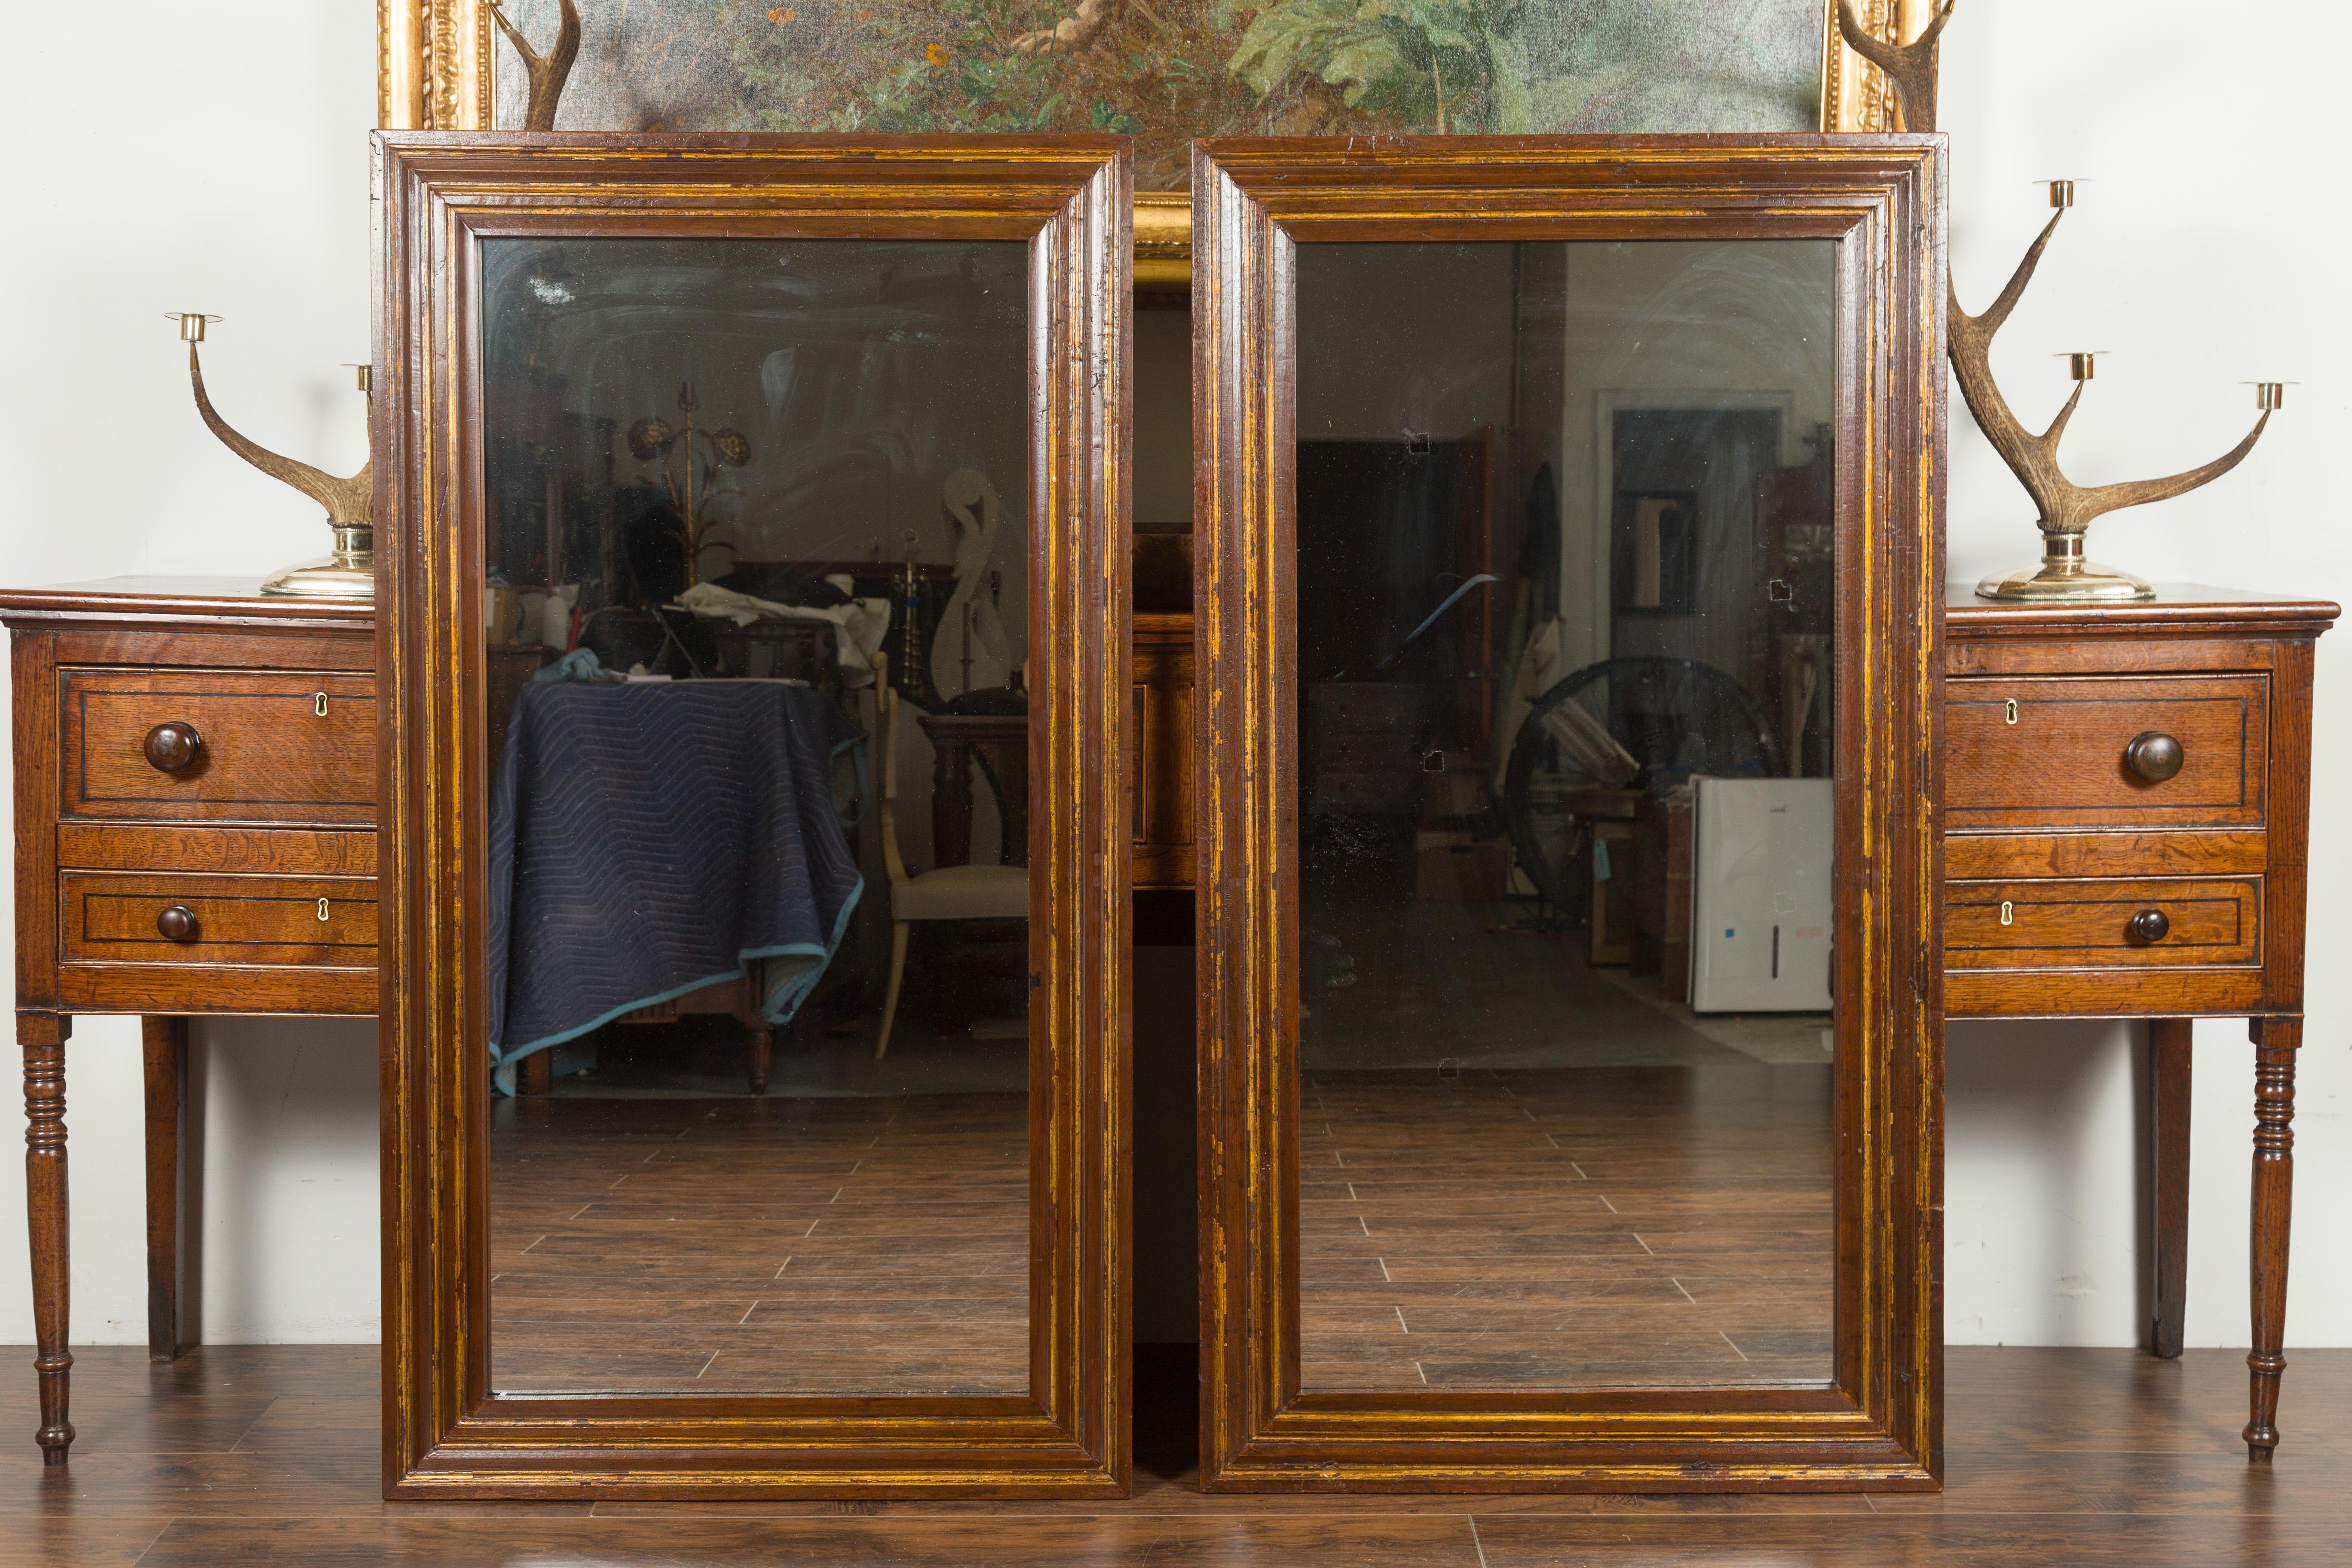 A pair of Italian walnut mirrors from the early 19th century, with brown patina and gilt accents. Created in Italy during the first quarter of the 19th century, each of this pair of walnut mirrors features a simple, rectangular frame, alternating